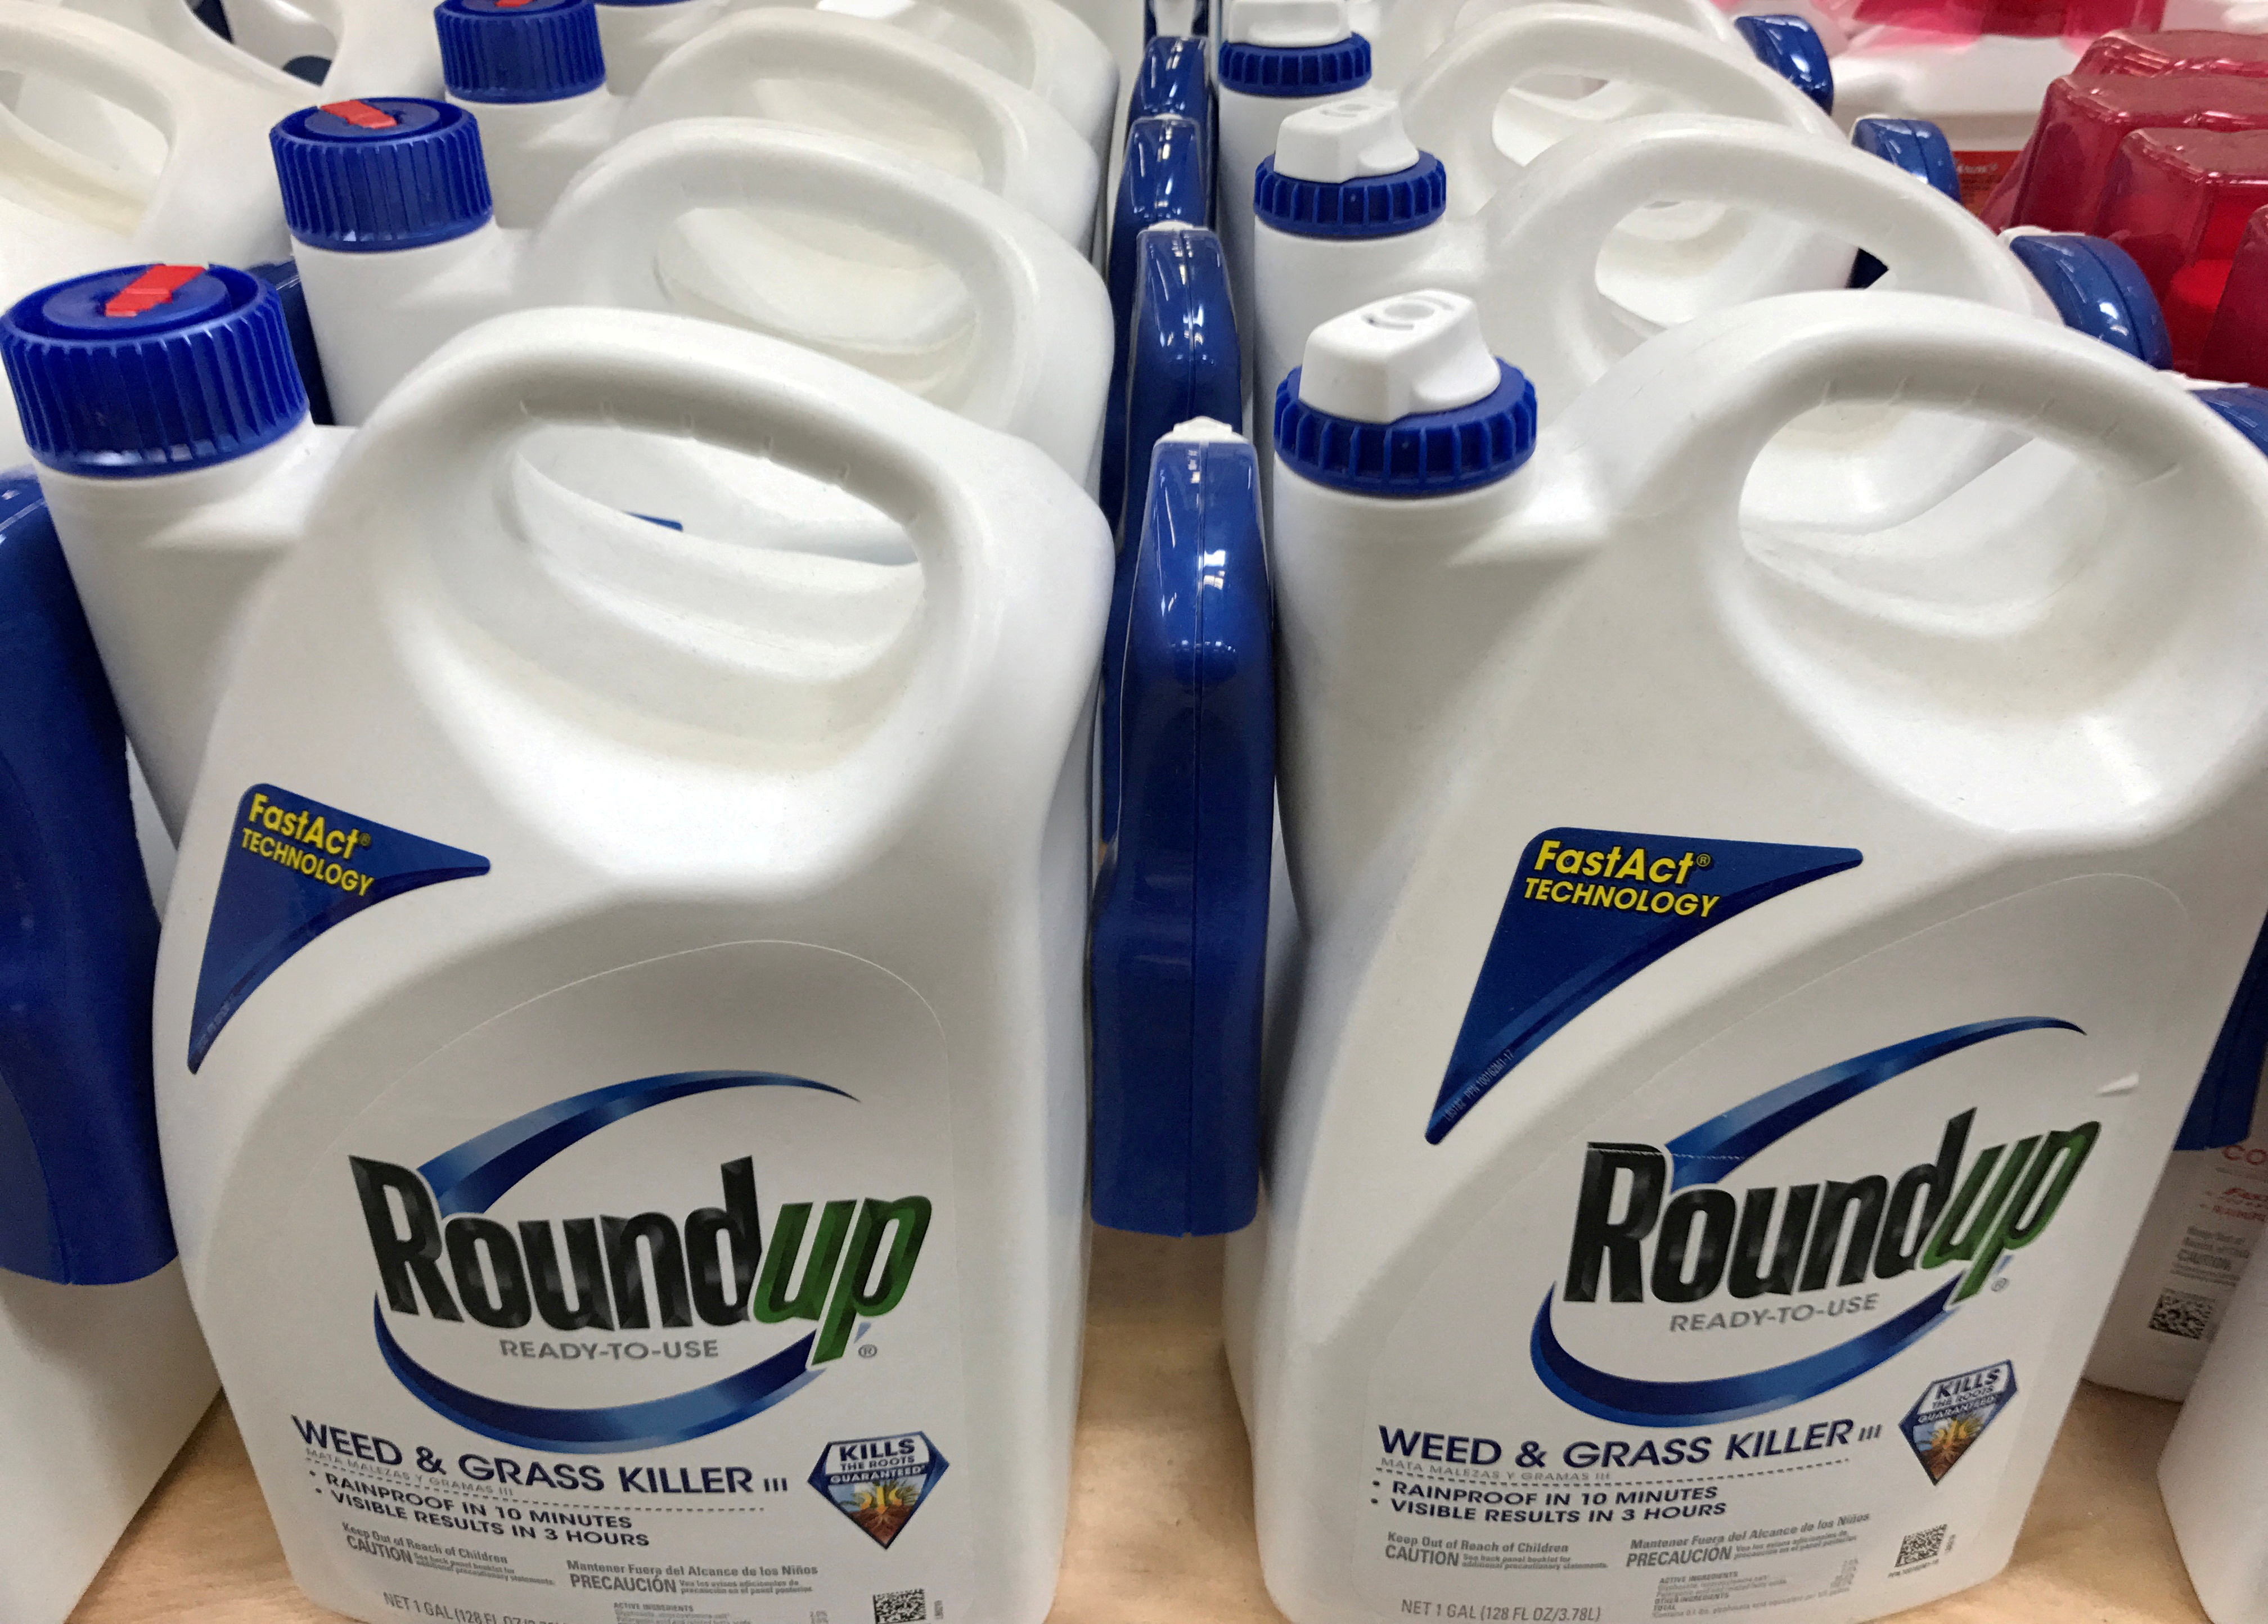 Bayer's Roundup shown for sale in California